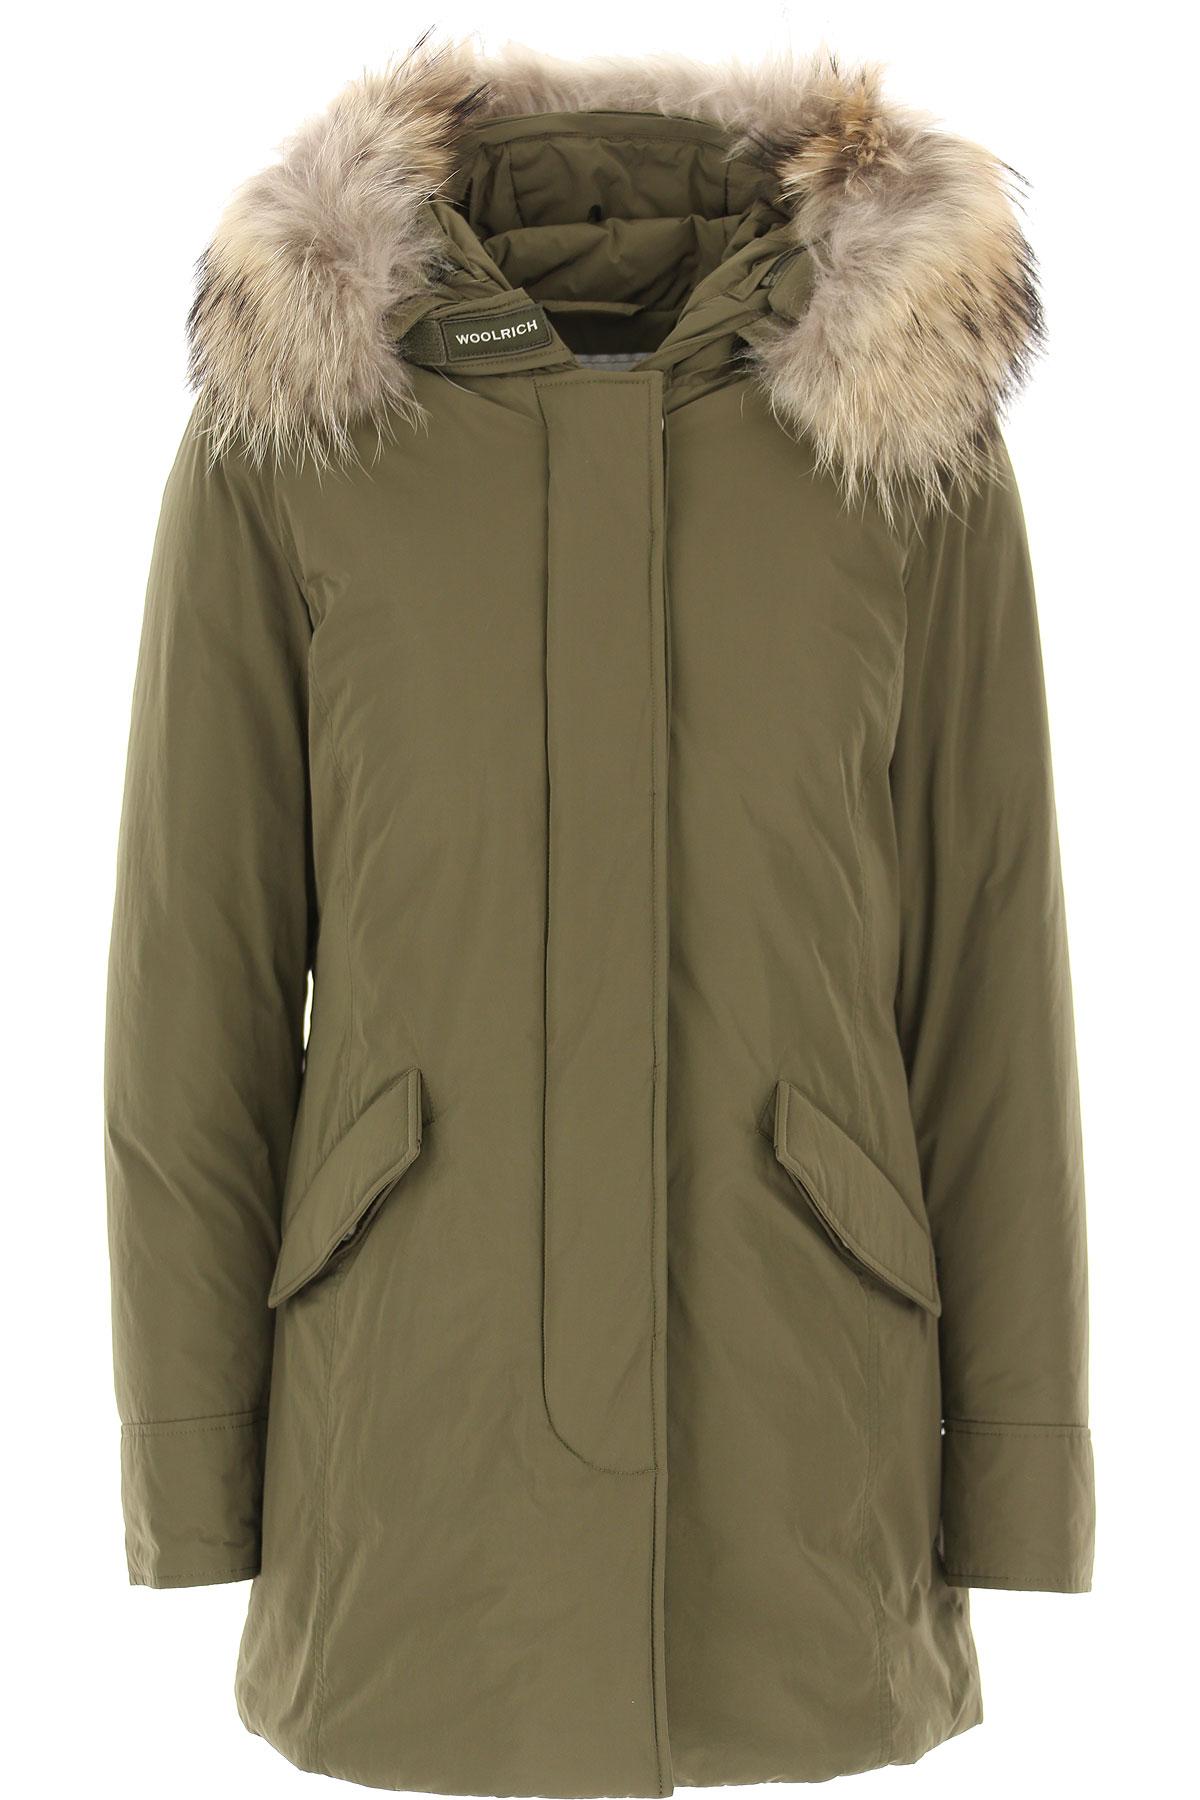 Woolrich Arctic Down Parka With Genuine Coyote Fur Trim in Military ...